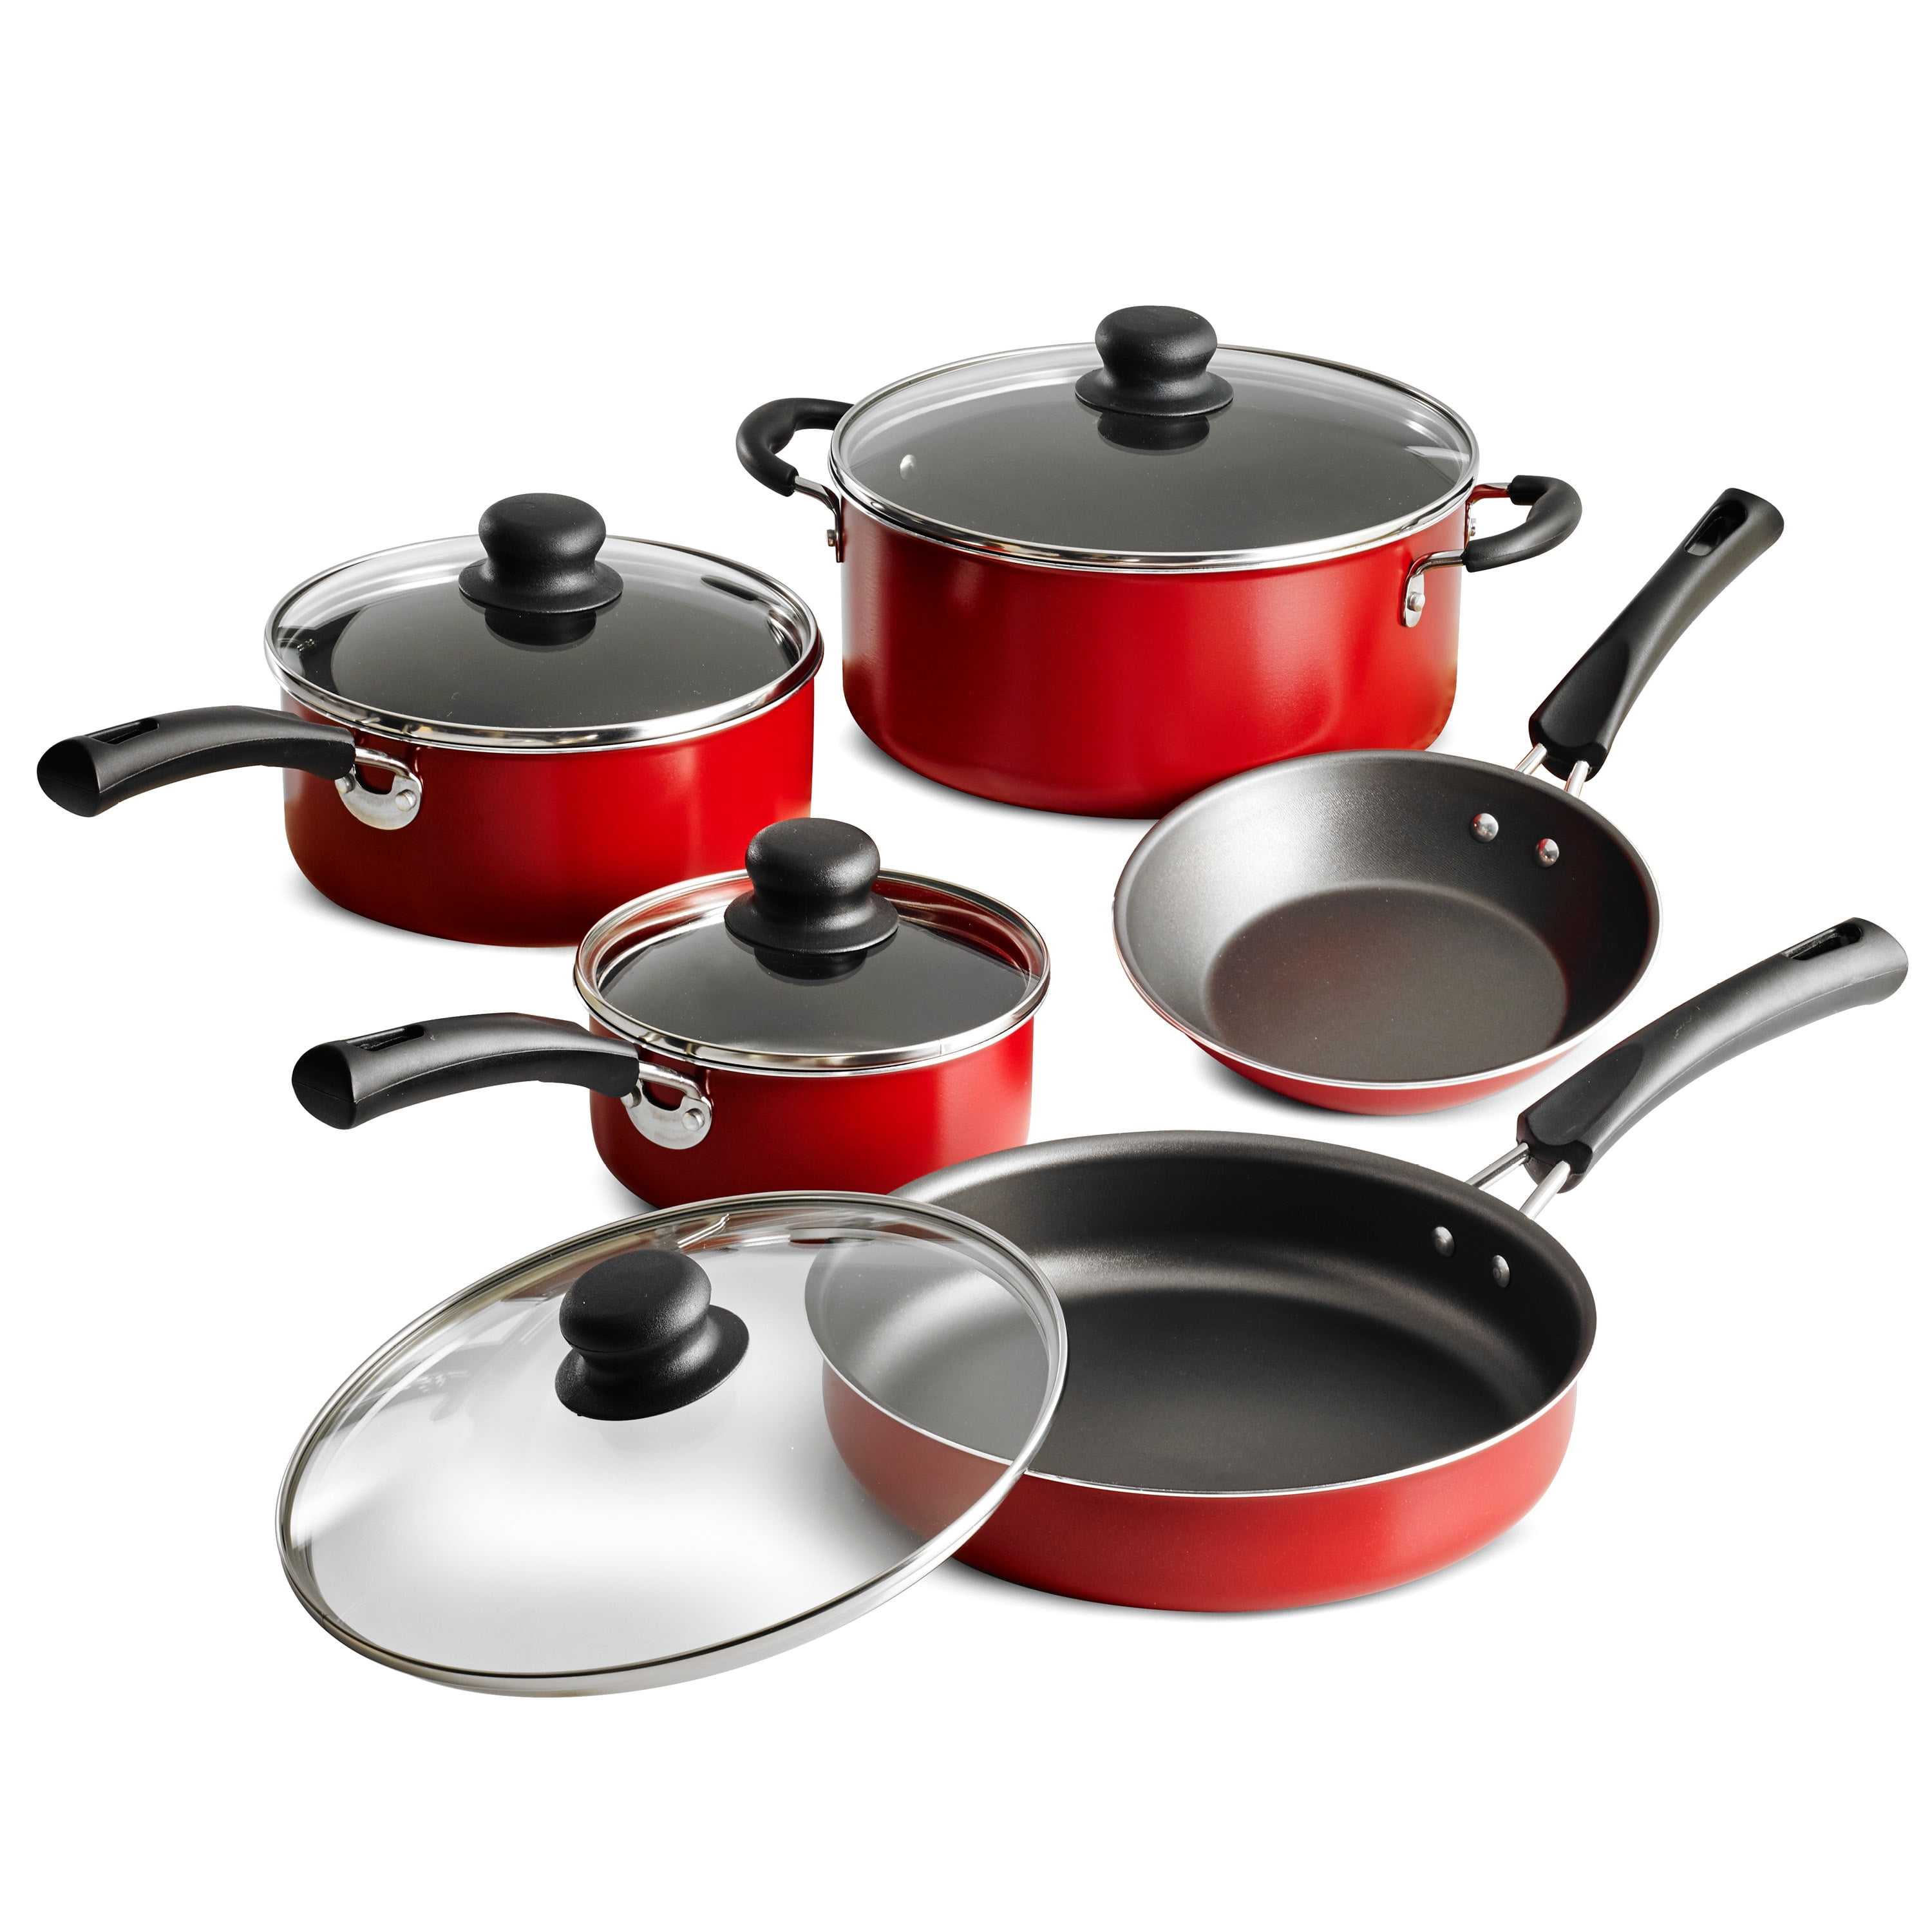 tramontina cookware review